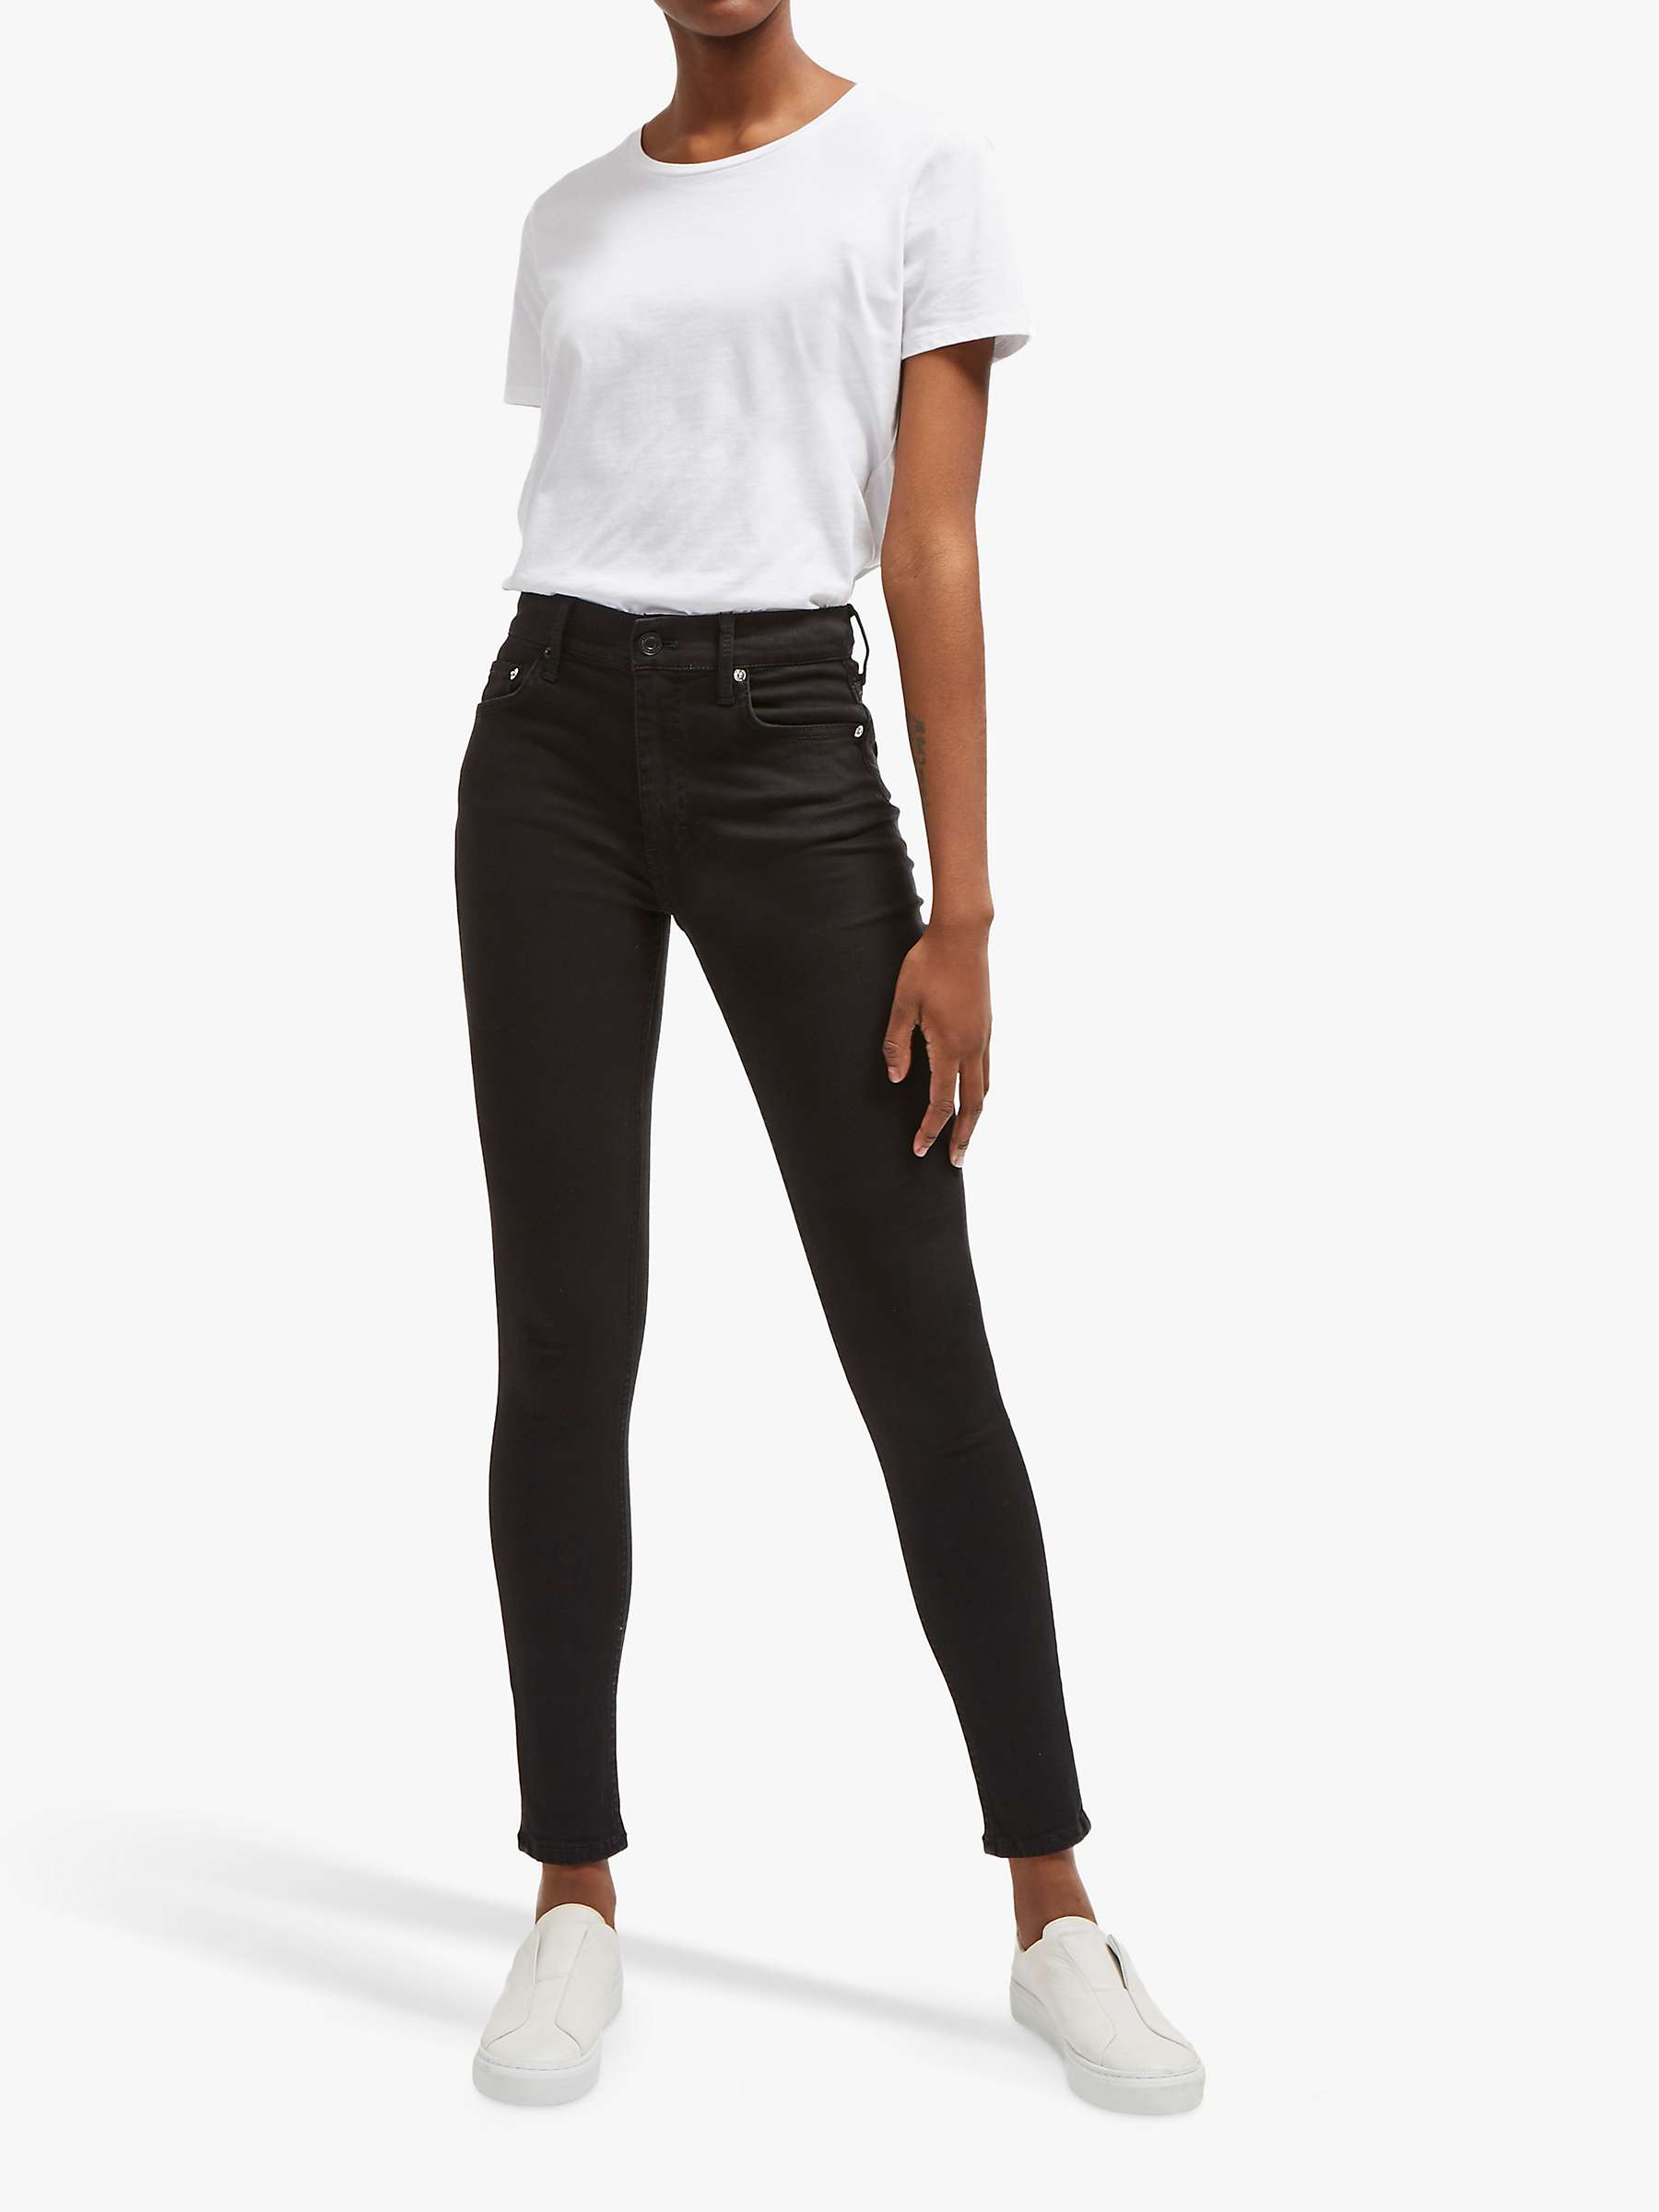 French Connection Mid Rise Skinny Rebound Jeans, Black at John Lewis ...